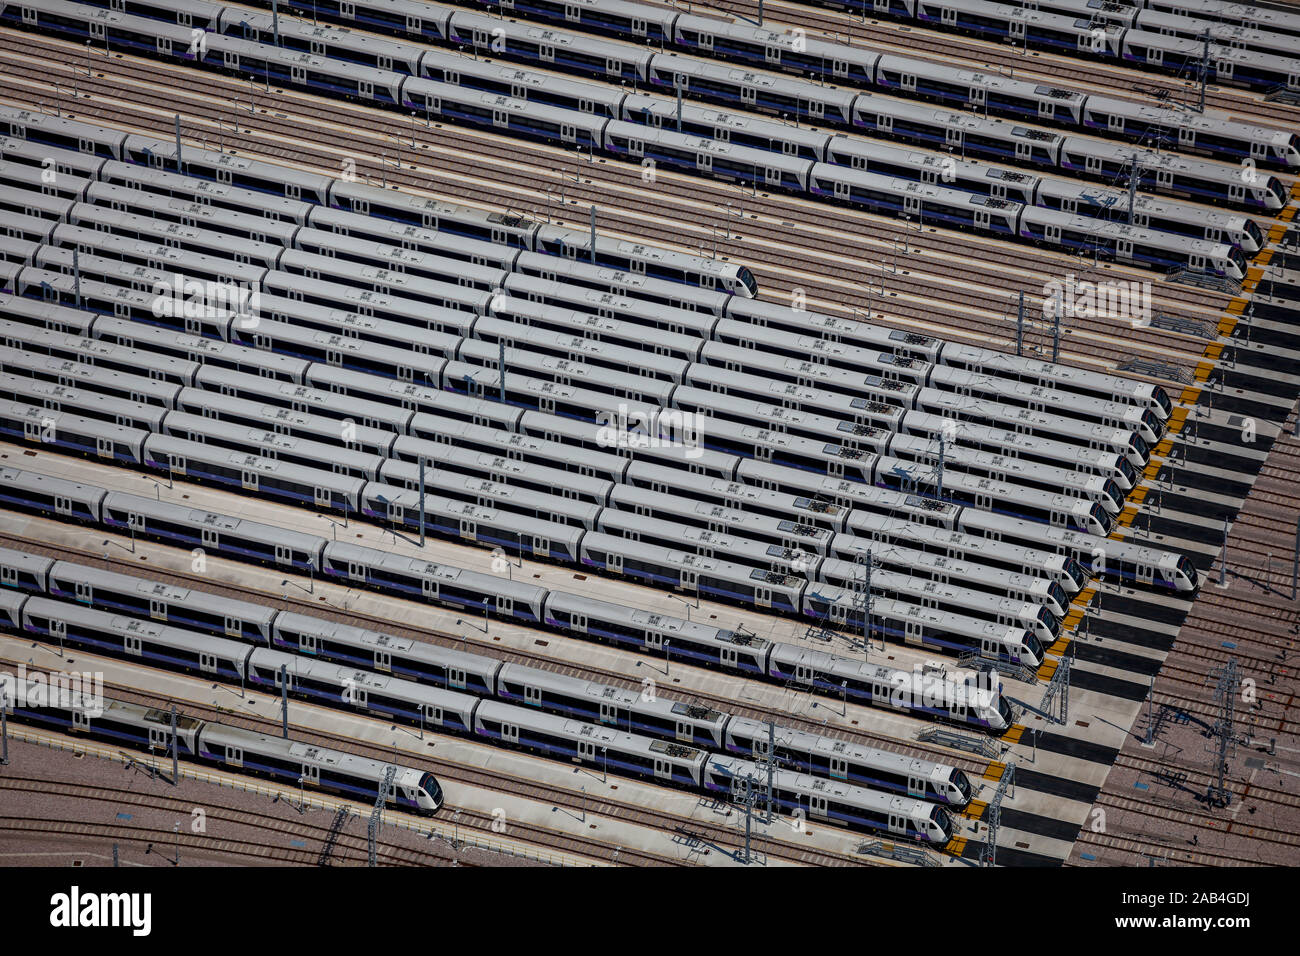 Aerial View of Old Oak Common Railway Station Depot, London, UK Stock Photo